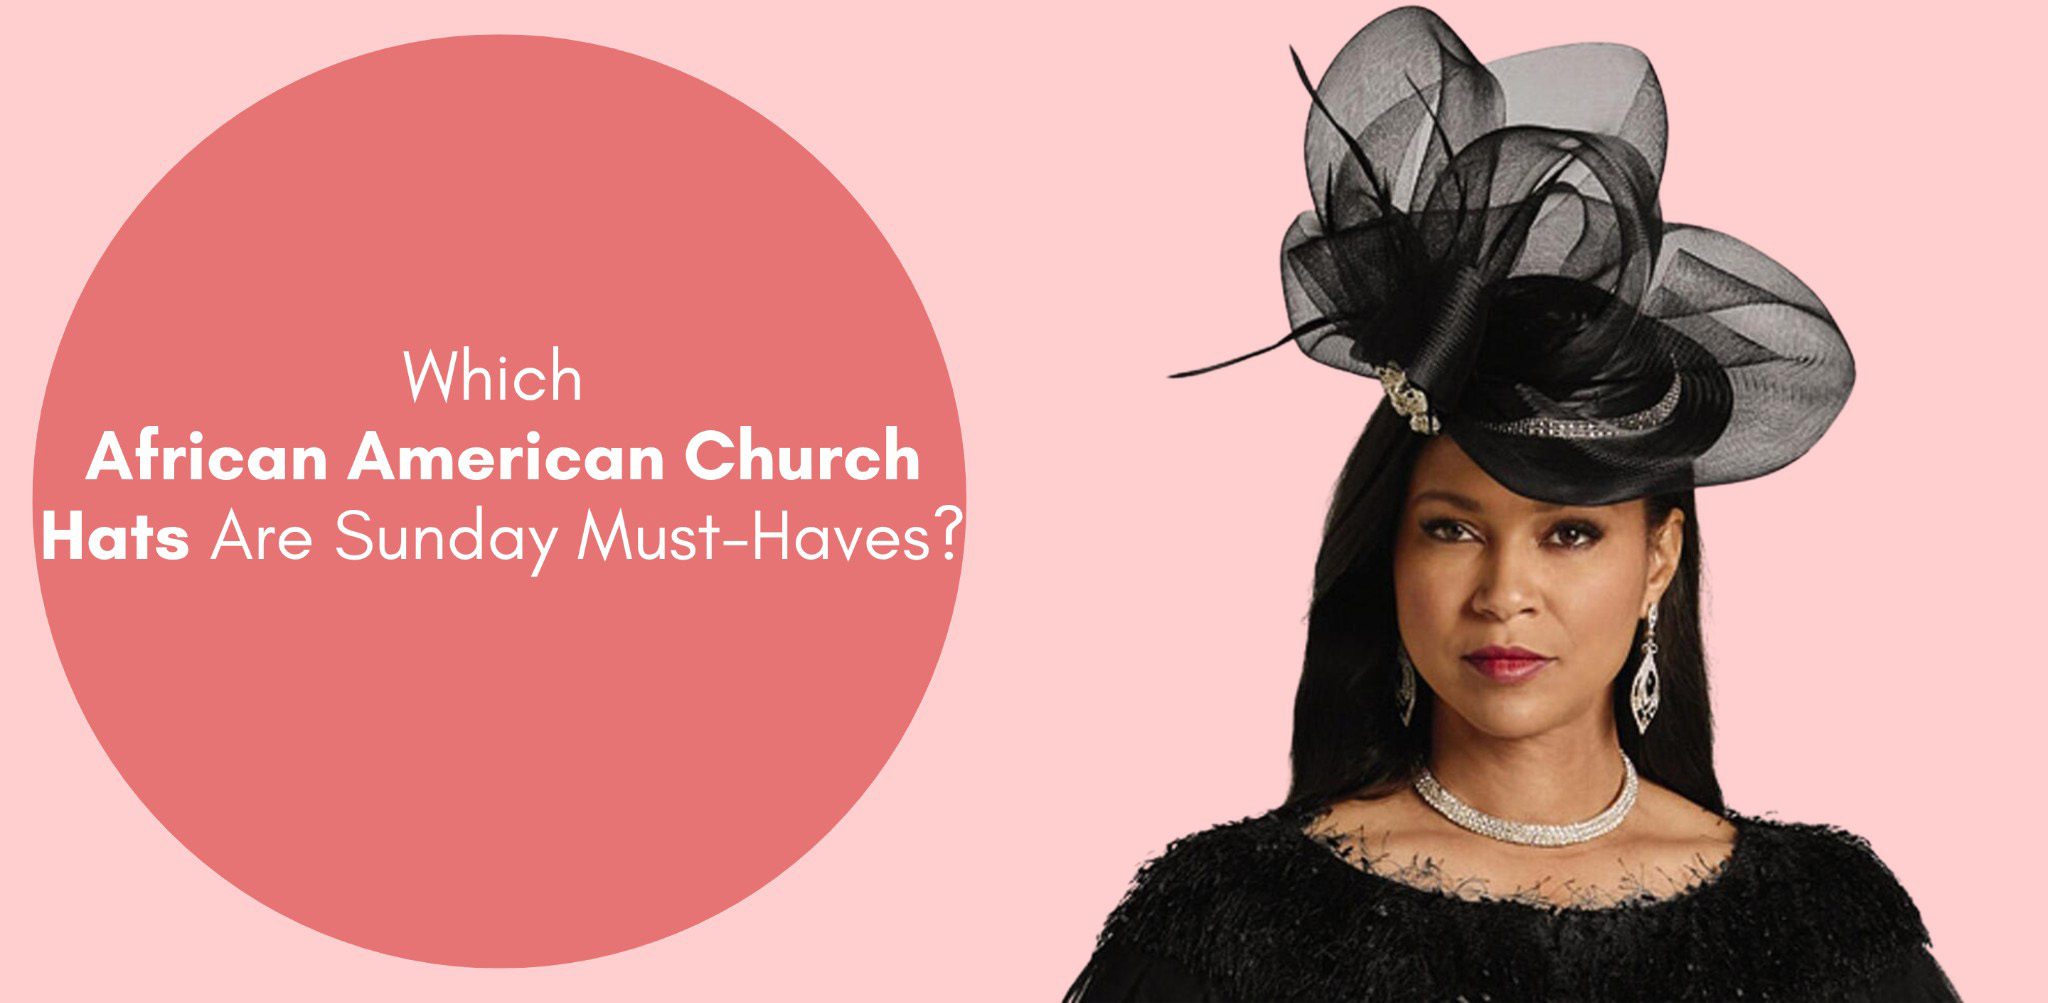 Which African American Church Hats Are Sunday Must-Haves?